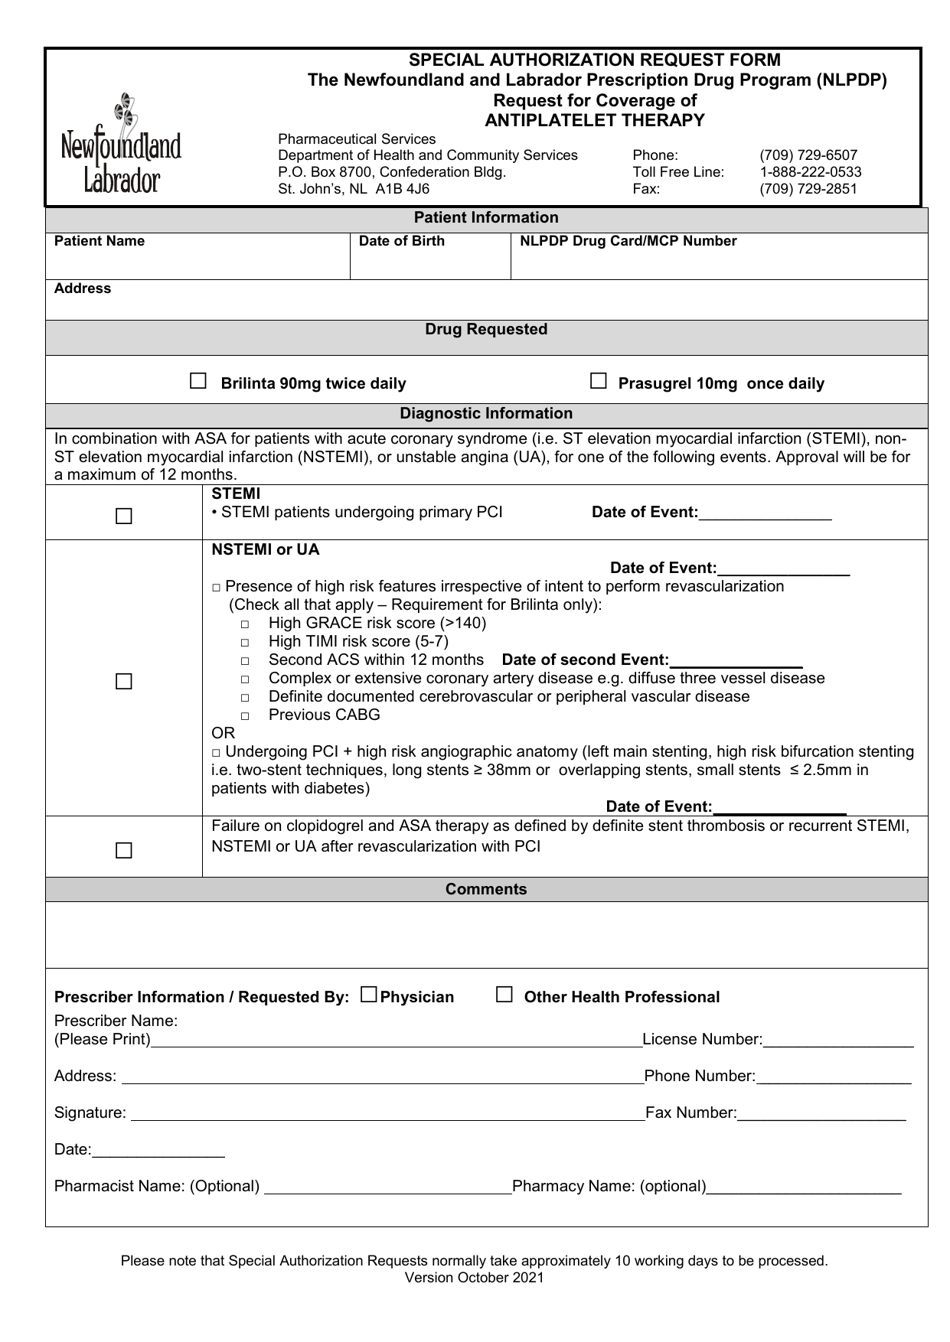 Special Authorization Request Form - Request for Coverage of Antiplatelet Therapy - Newfoundland and Labrador, Canada, Page 1